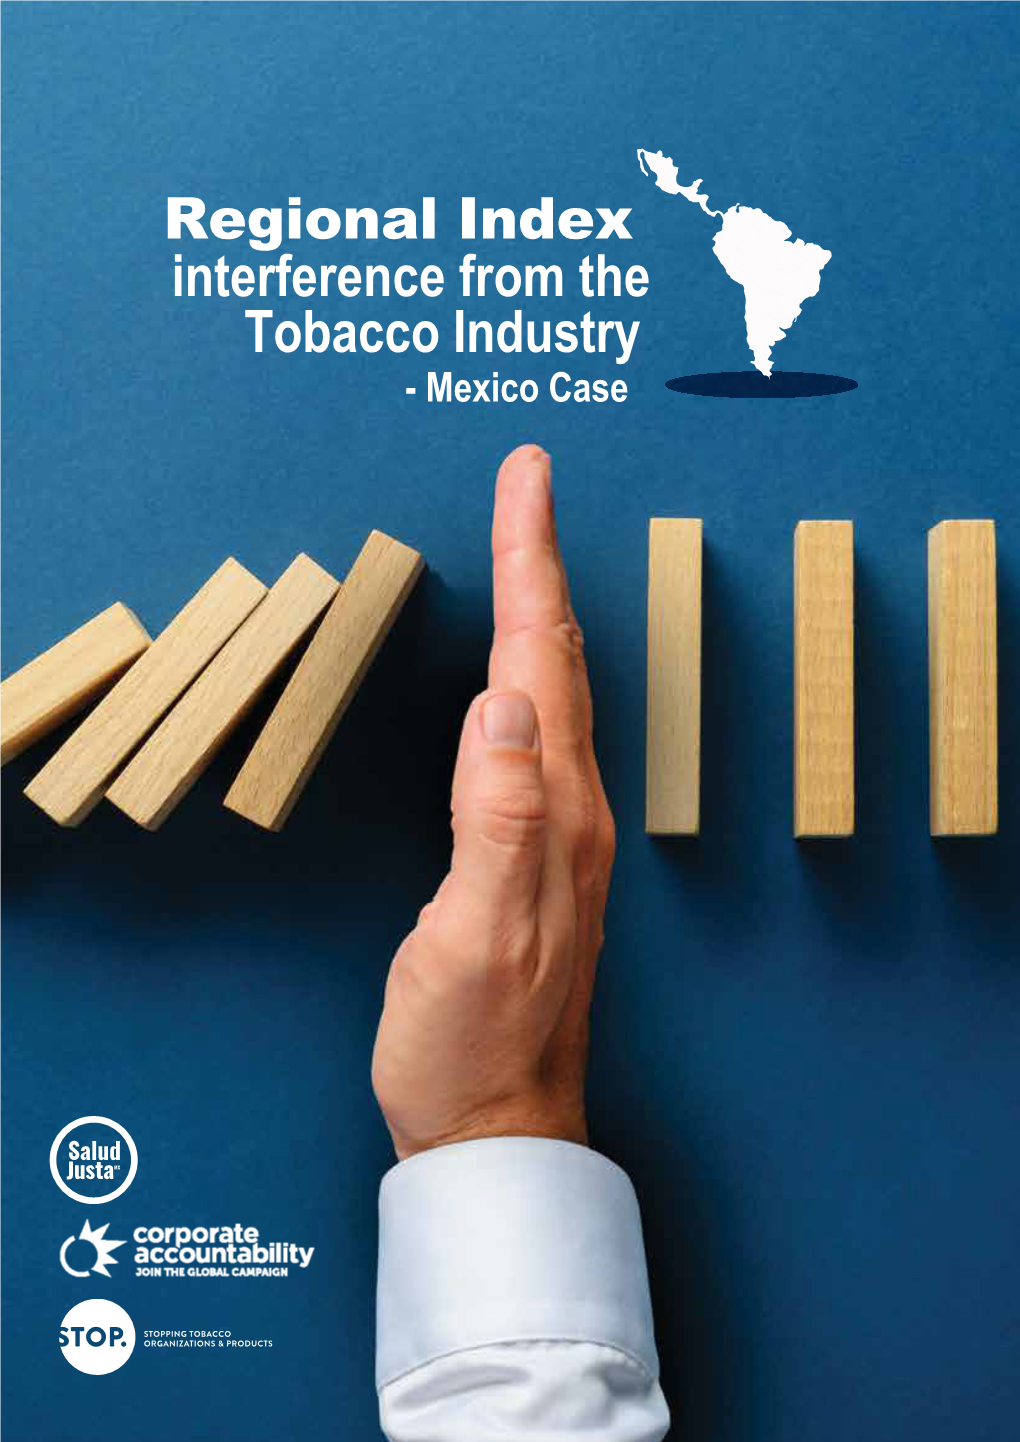 Interference from the Tobacco Industry - Mexico Case